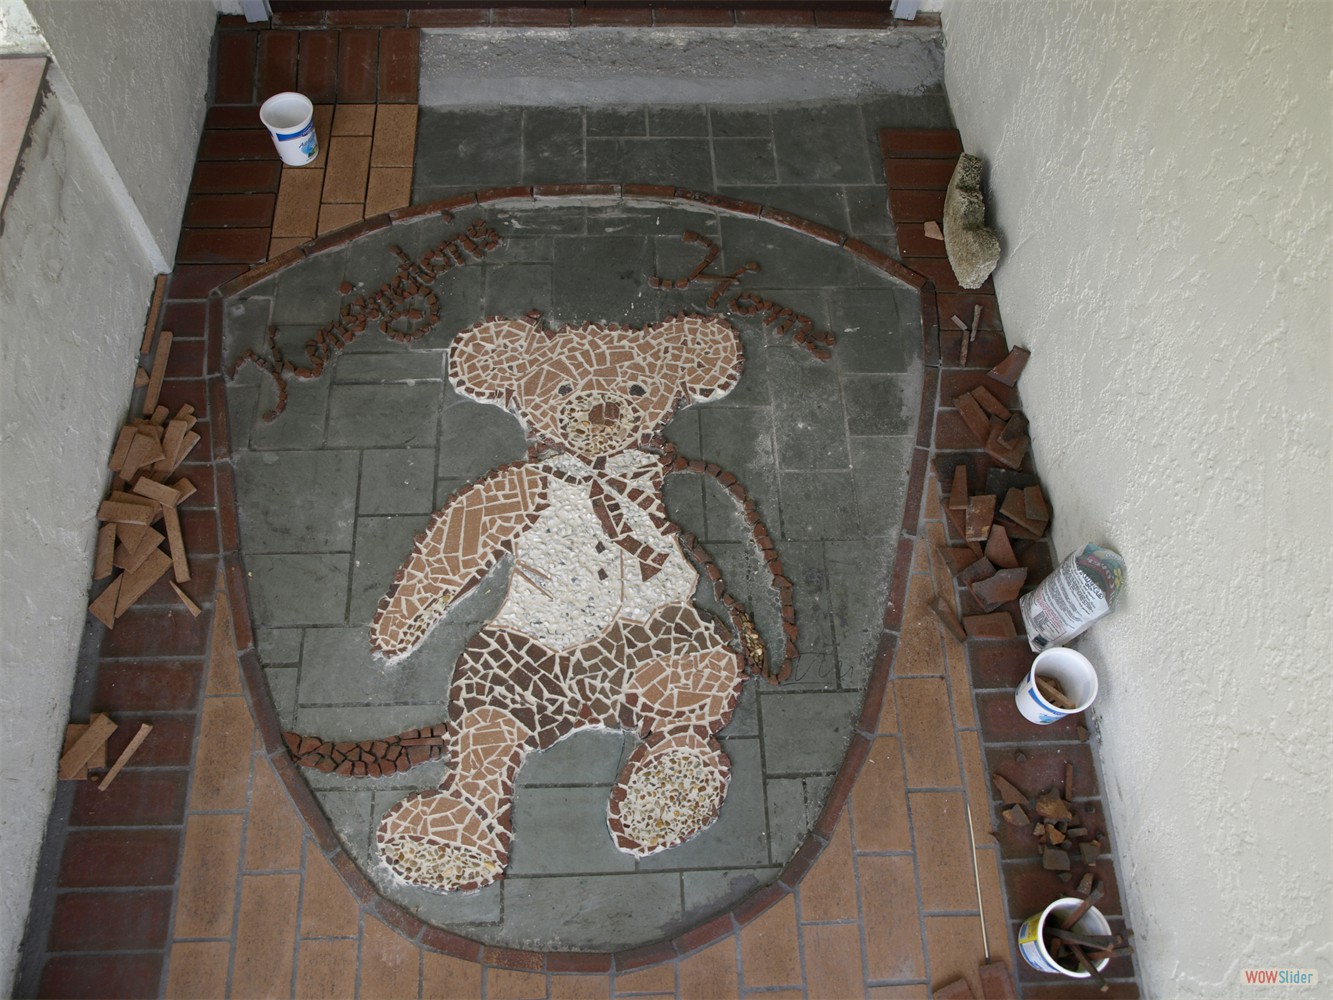 ... when she put down a mosaic showing the name of our house ...